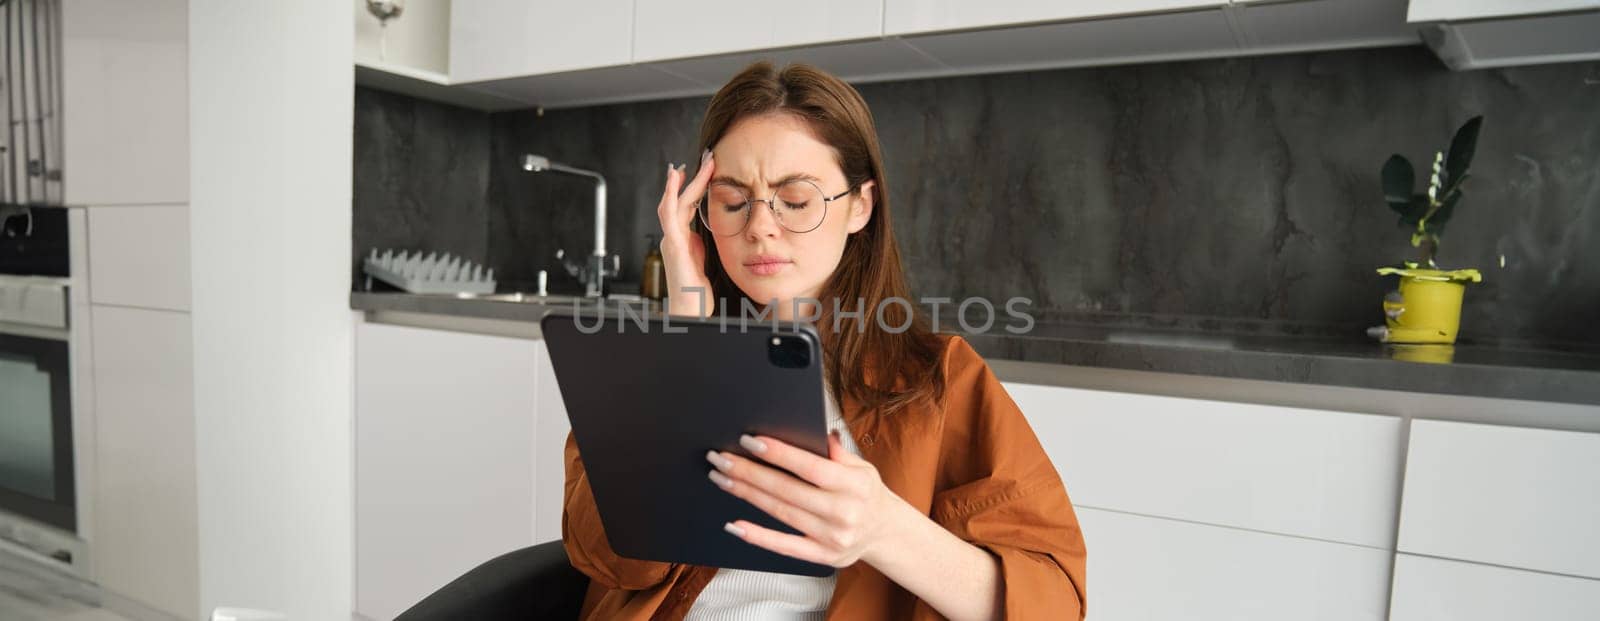 Portrait of woman freelancer, wearing glasses, holding digital tablet, looking tired, has migraine or headache, reading e-book. Freelance worker sits at home with gadget.